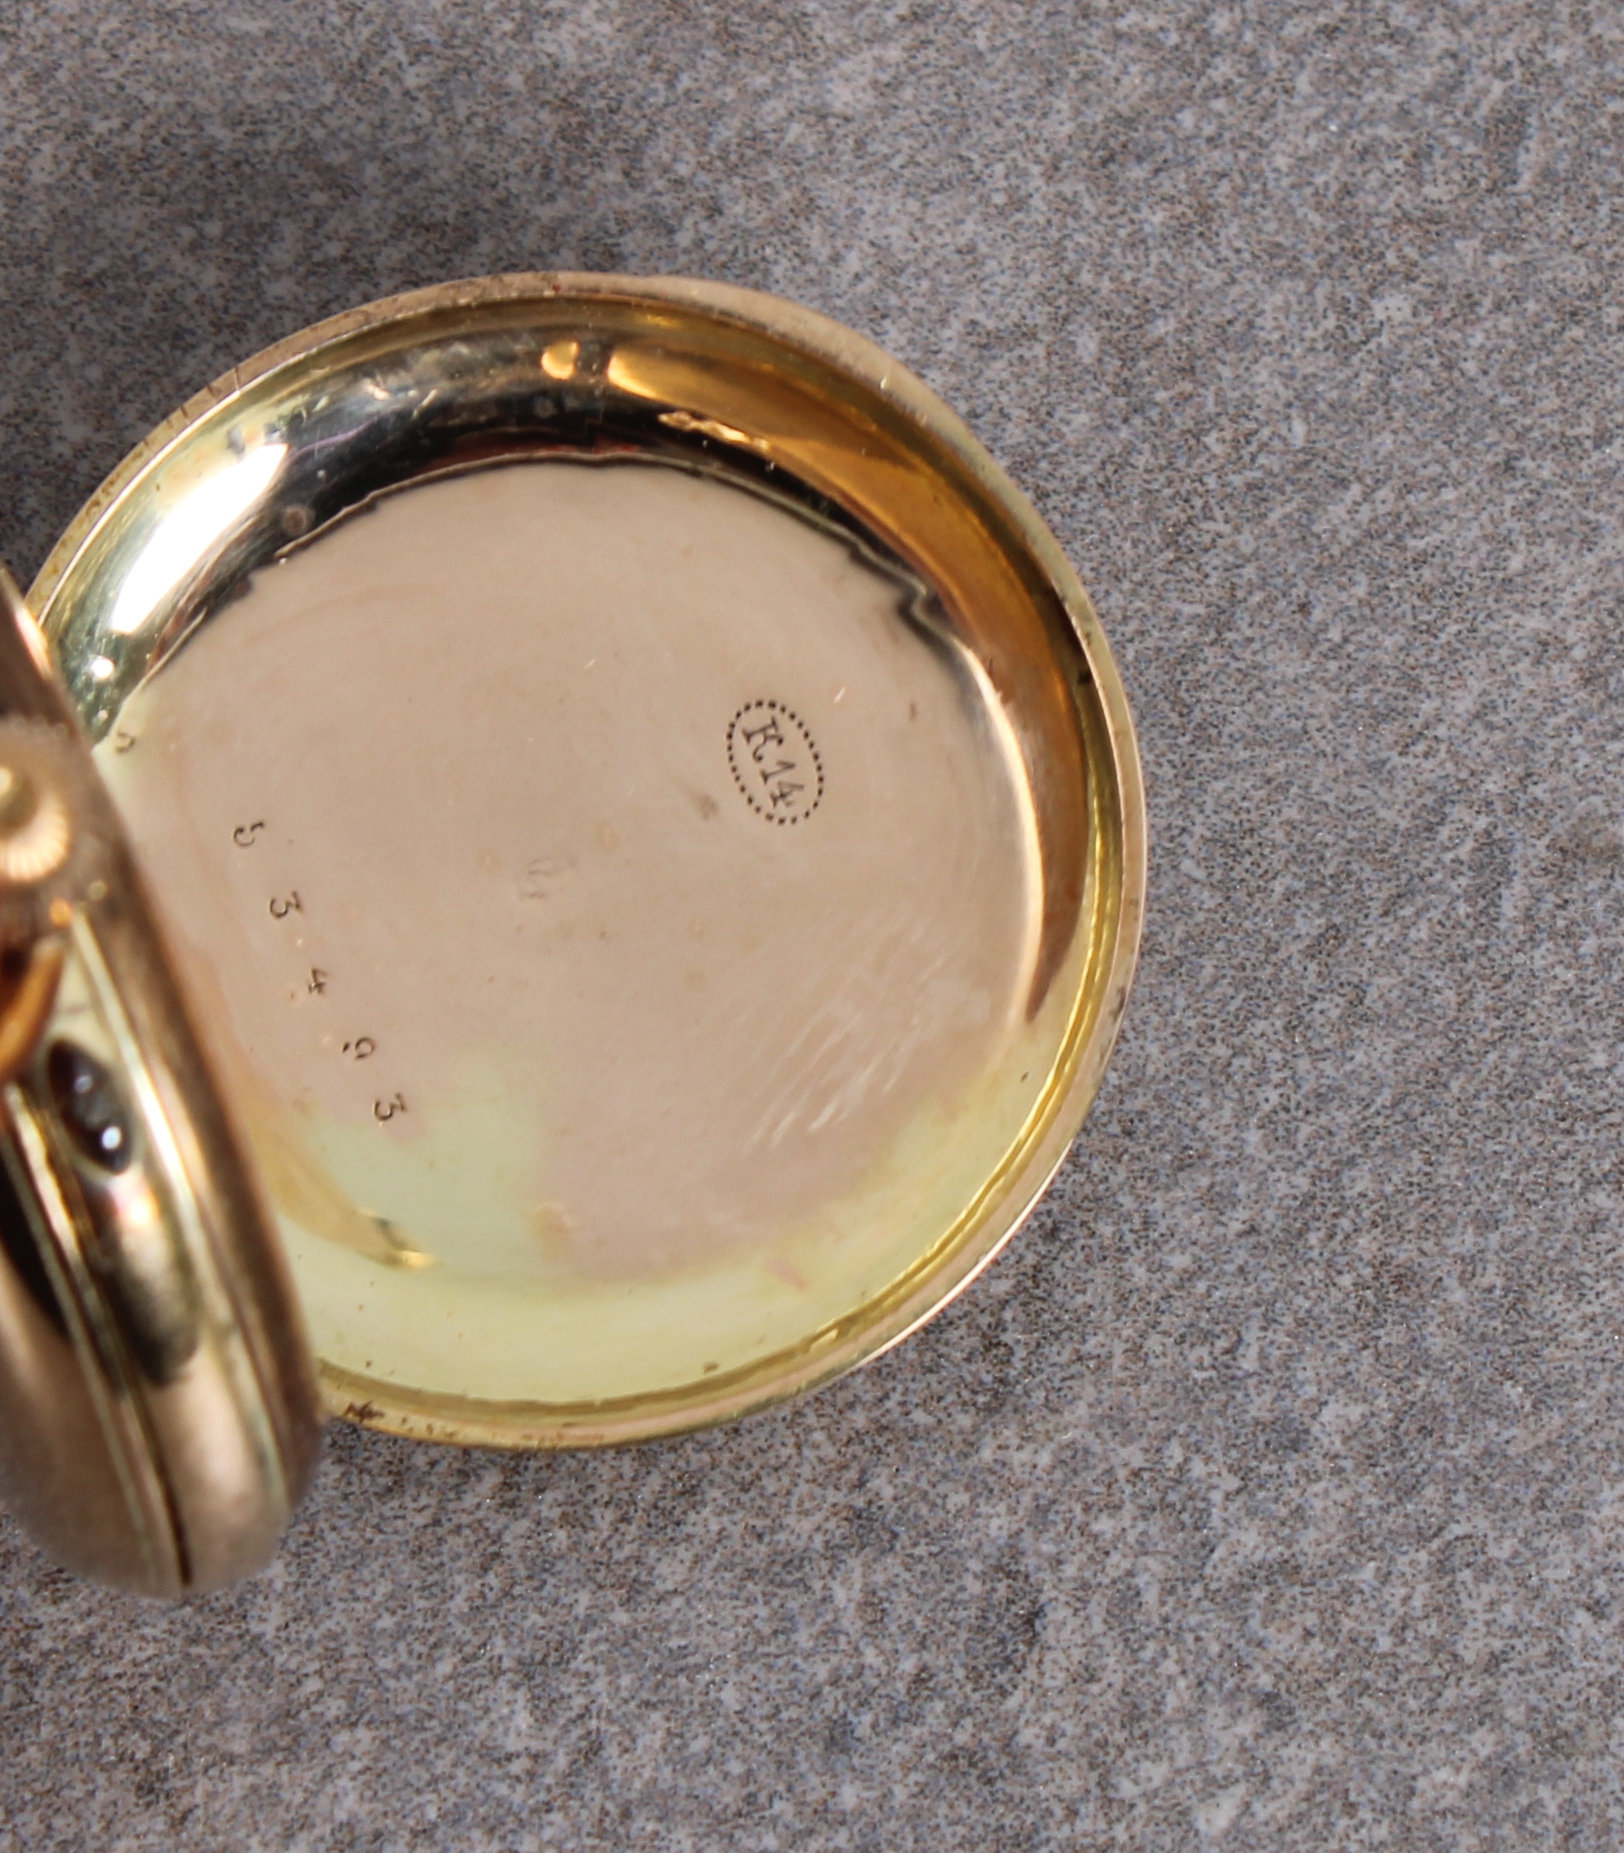 An Edwardian 14k gold-cased ladies fob watch with blue enamelled Roman numerals outer - Image 3 of 3